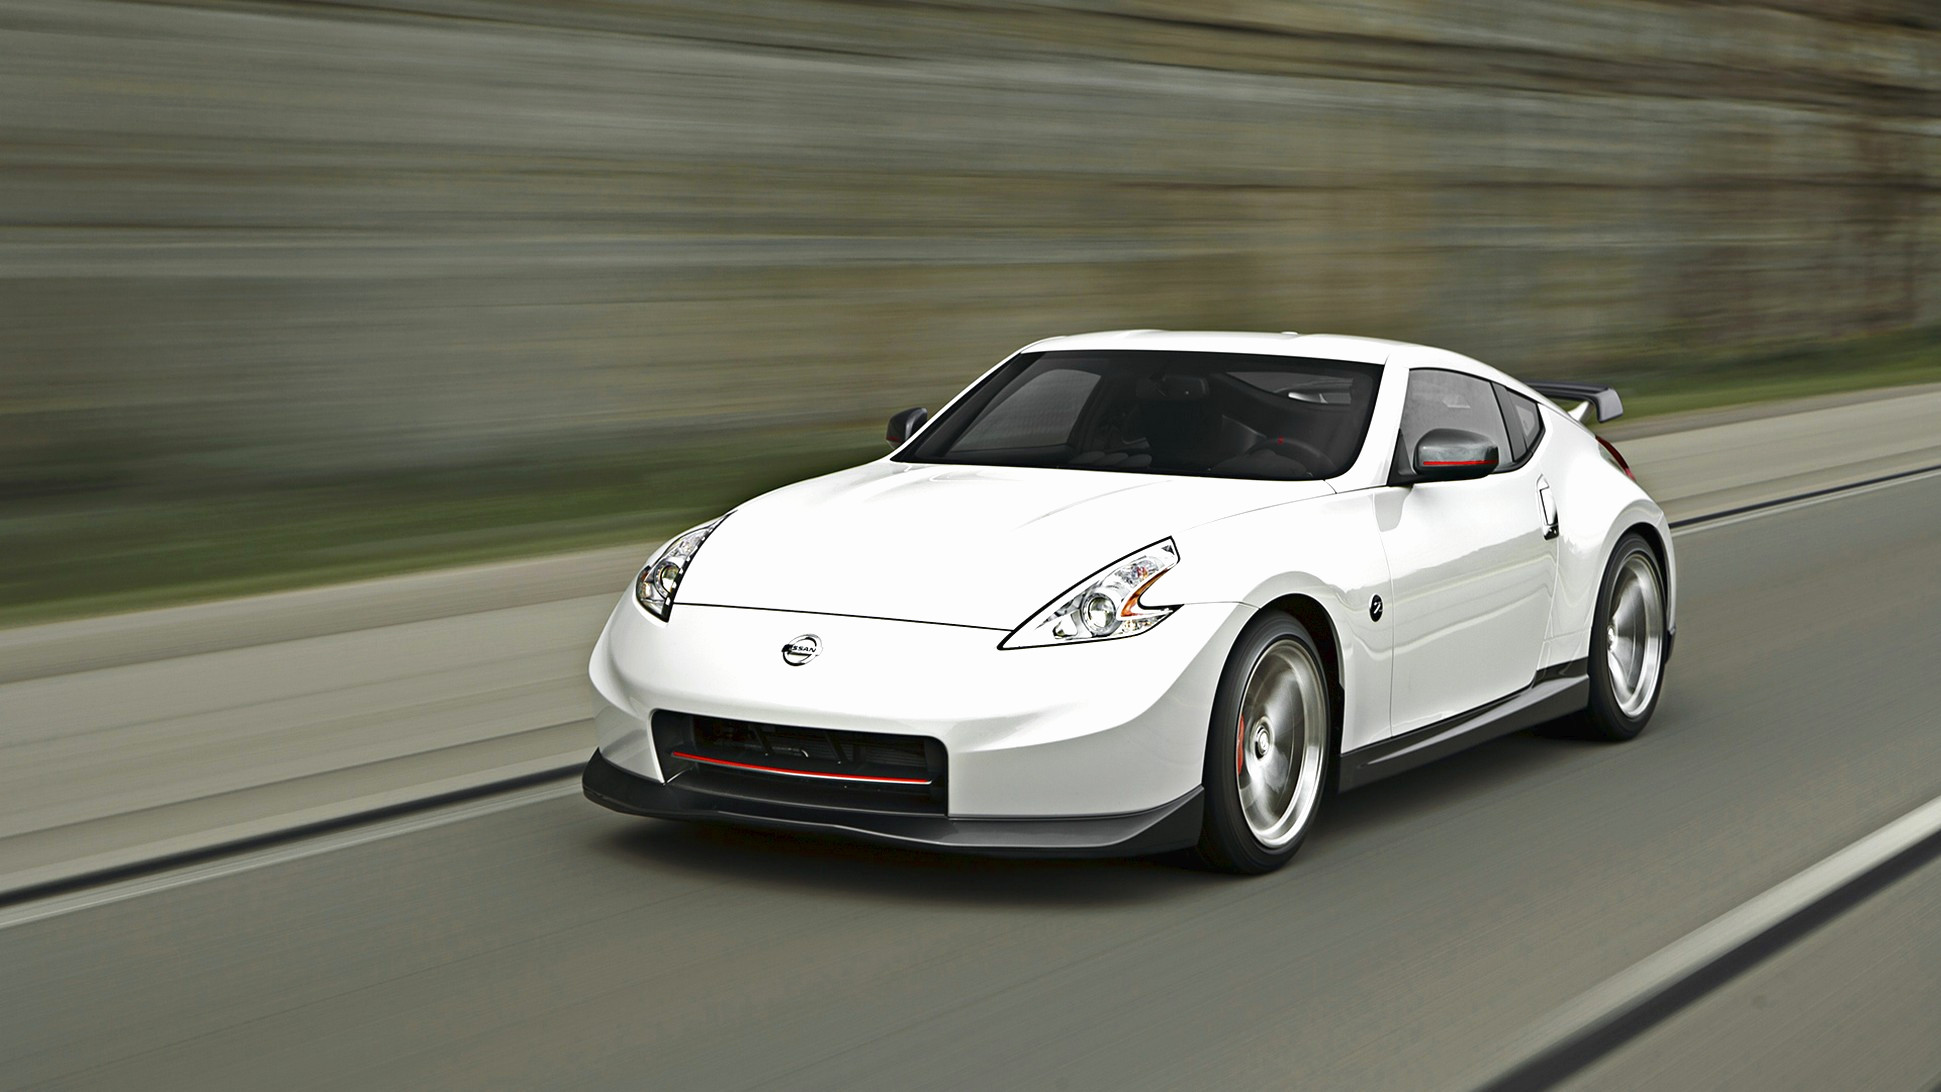 1941x1092 Cars Wallpapers 2014 Awesome 2014 Nissan 370z Nismo V8 Hd Car Wallpaper Car  Pic Hd Wallpapers